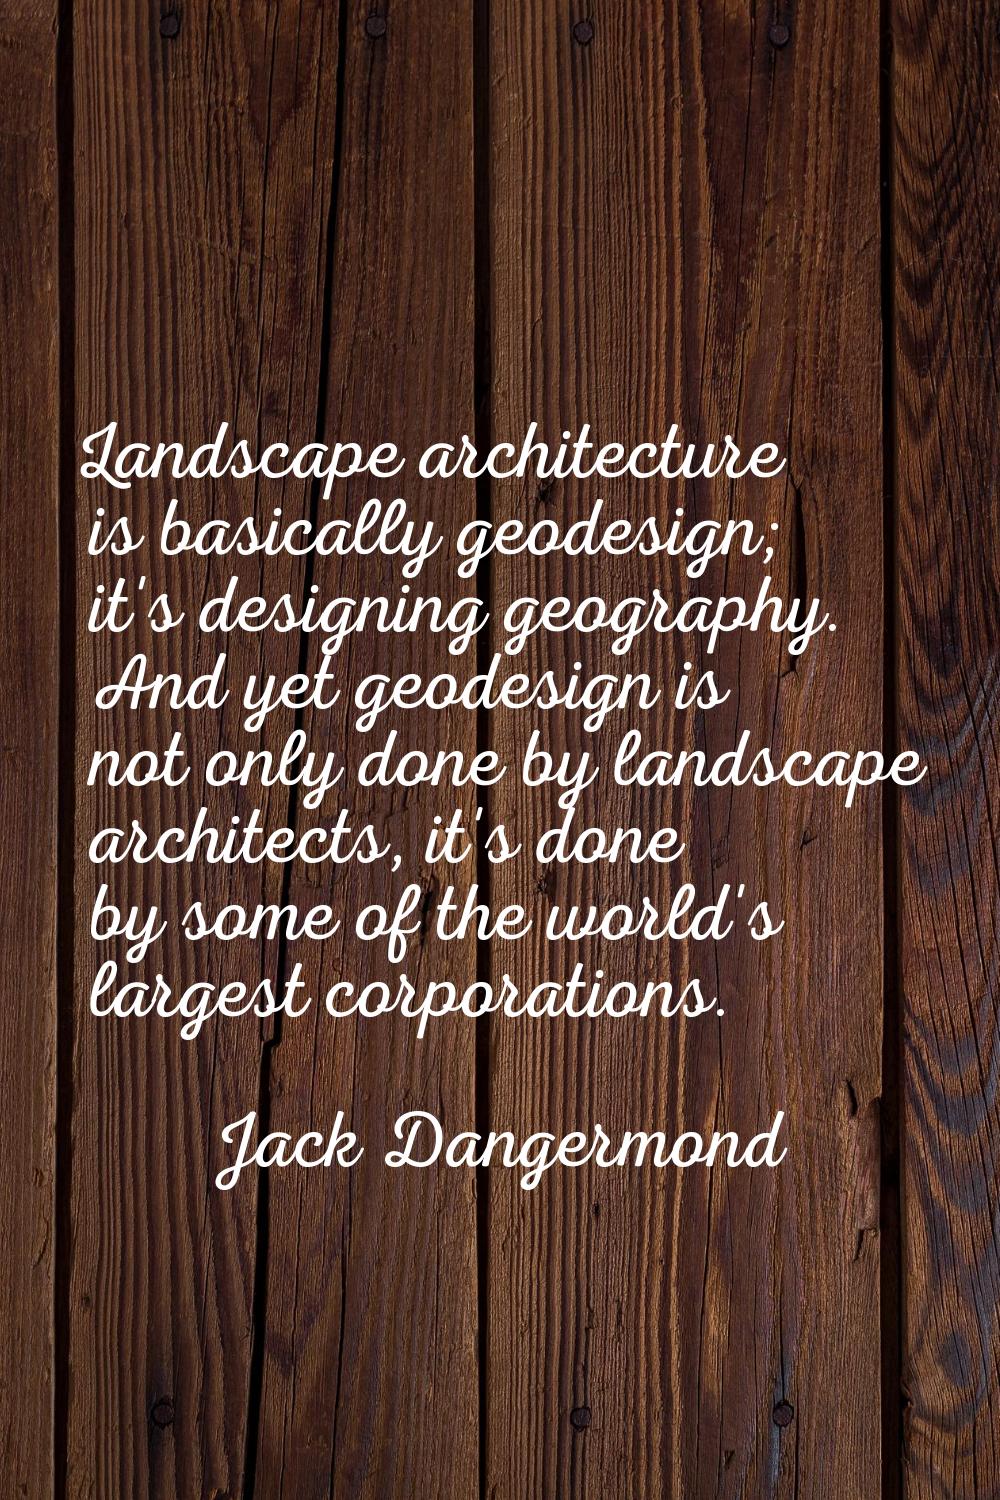 Landscape architecture is basically geodesign; it's designing geography. And yet geodesign is not o